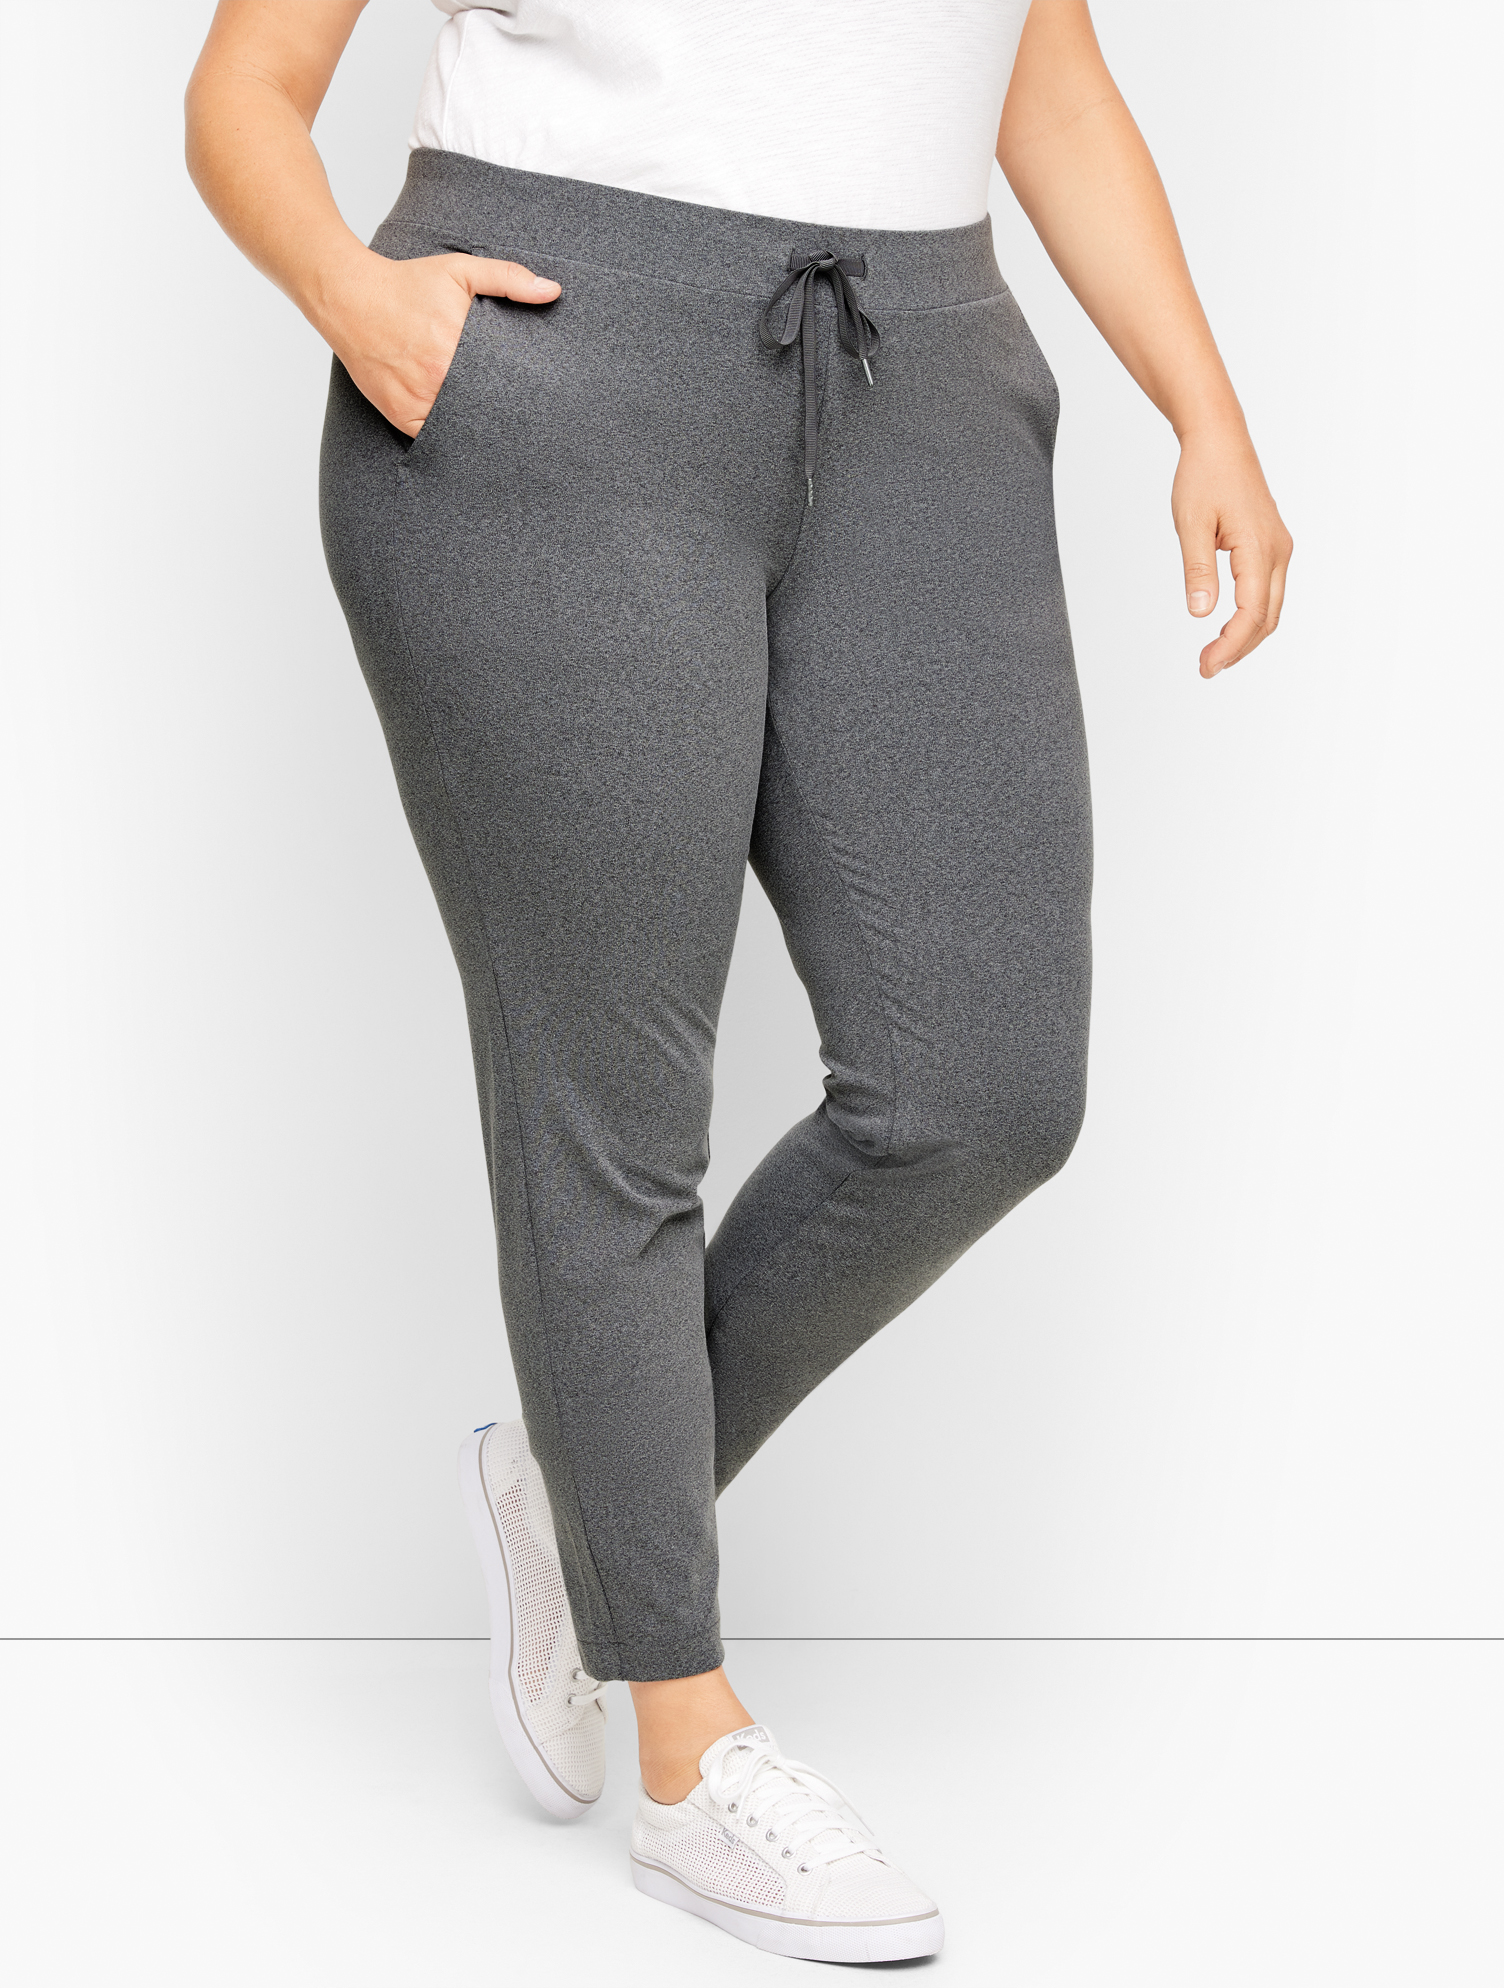 Talbots Out & About Stretch Jogger Pants - Shadow Heather - 1x